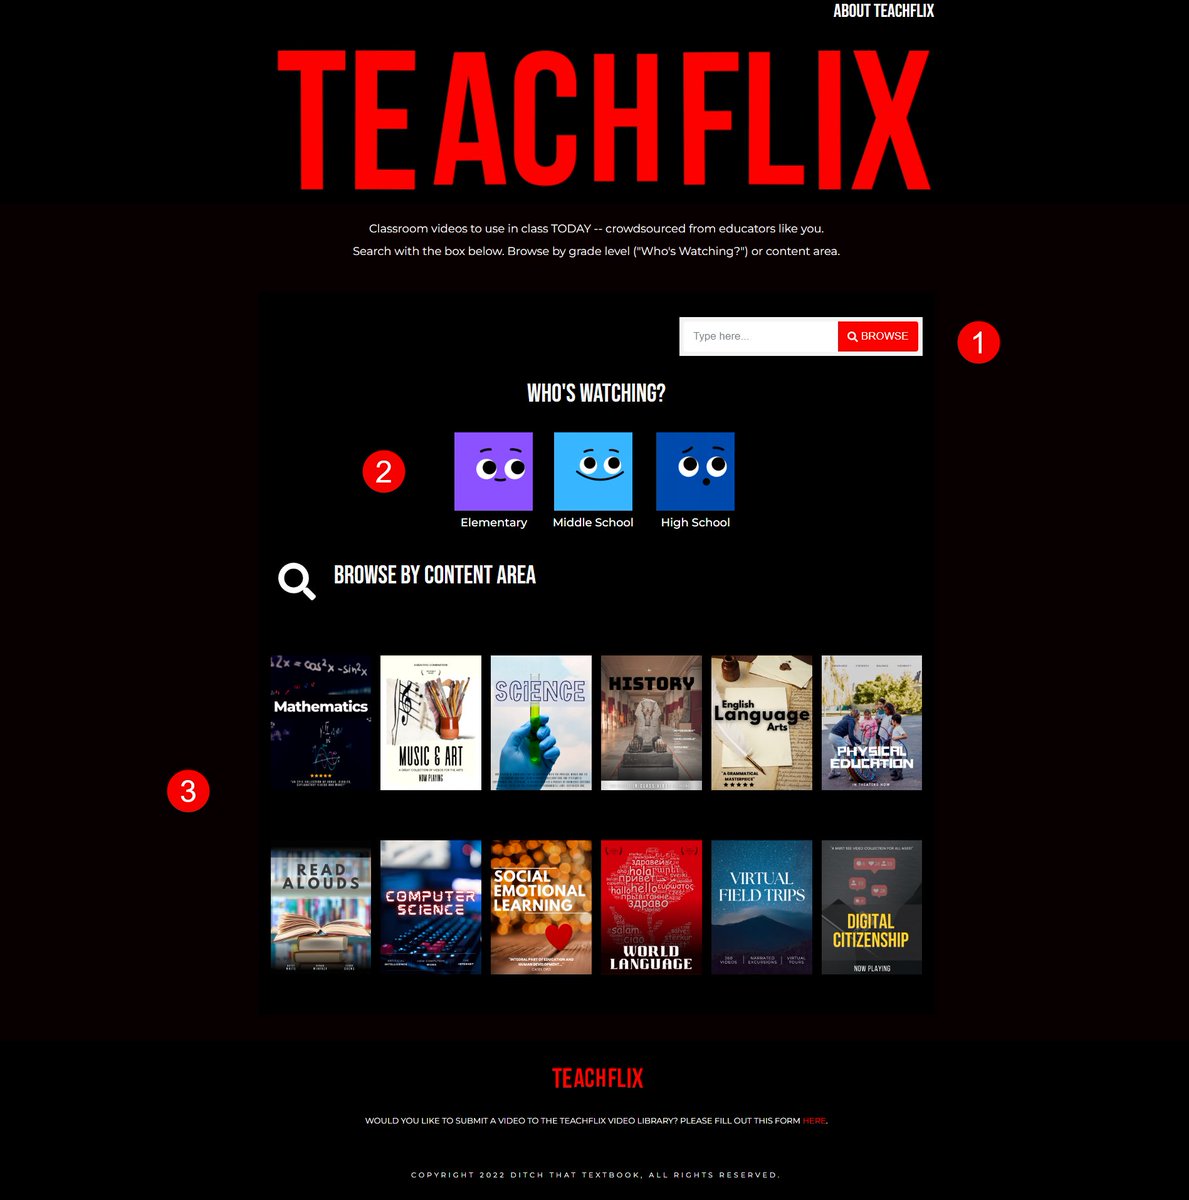 TeachFlix's homepage. It has several buttons that allow the viewer to narrow the result by searching for a specific video, grade level or subject/topic.